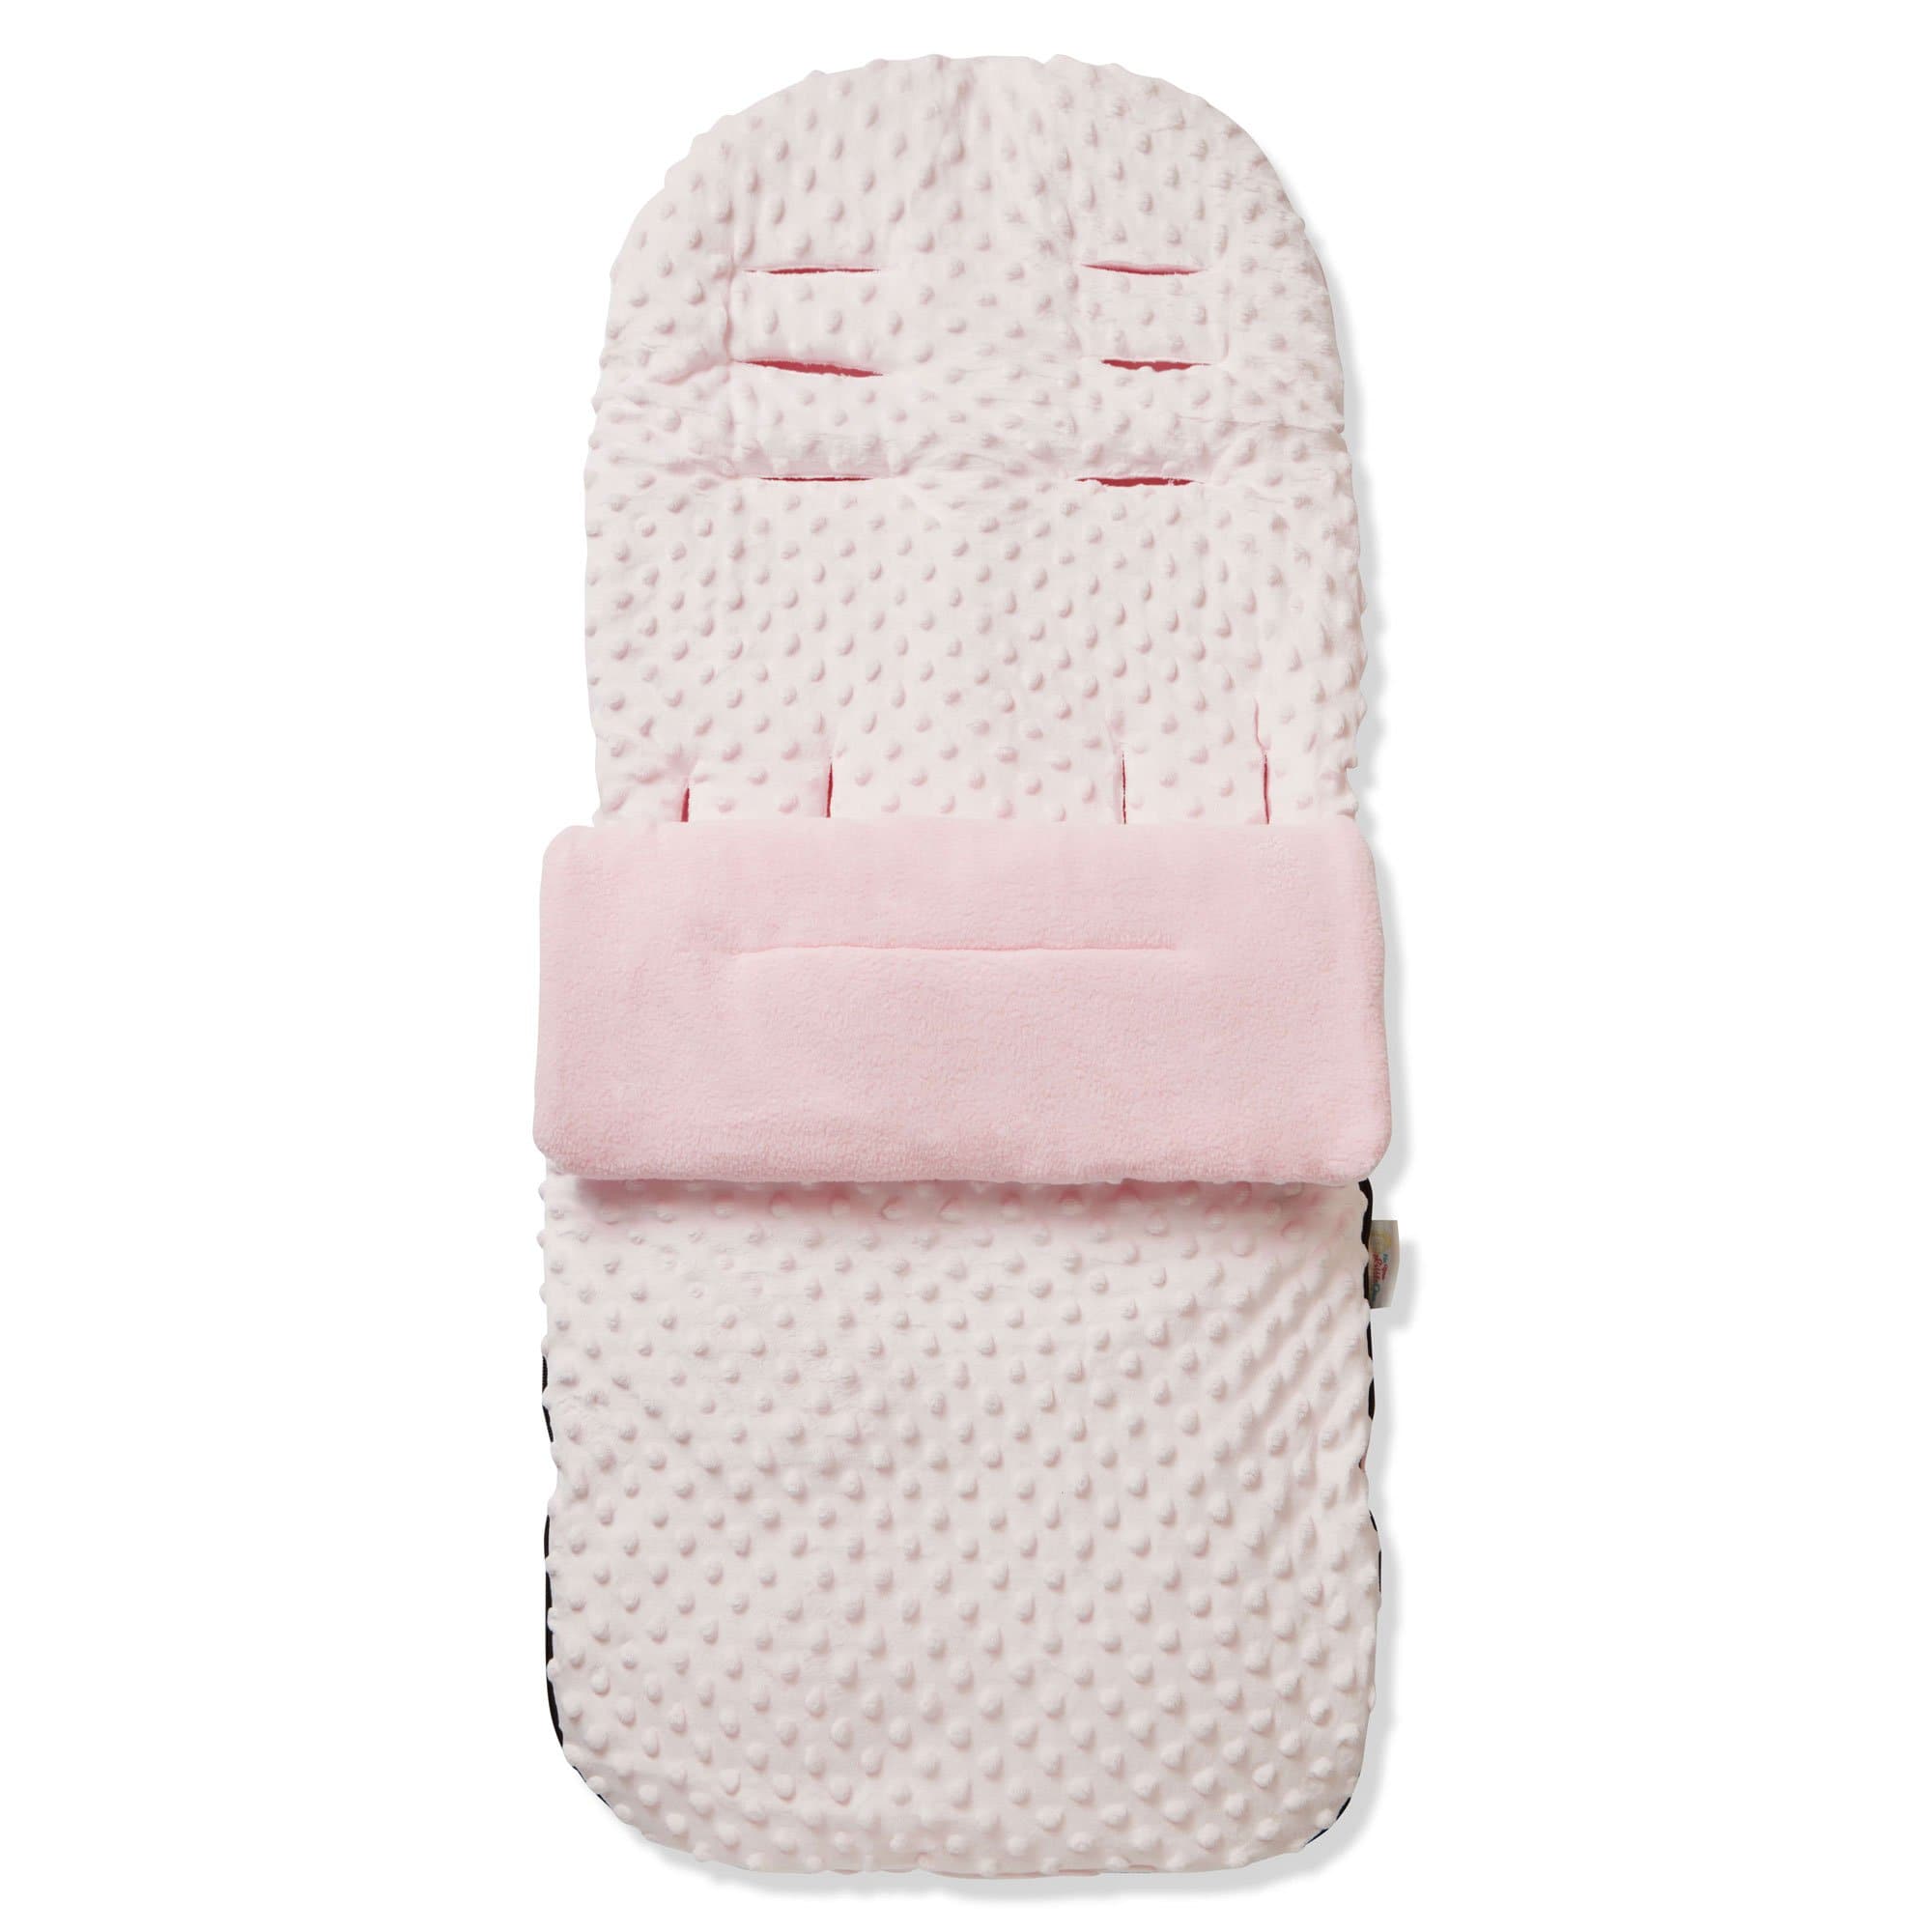 Dimple Footmuff / Cosy Toes Compatible with Bebe Confort - Pink / Fits All Models | For Your Little One